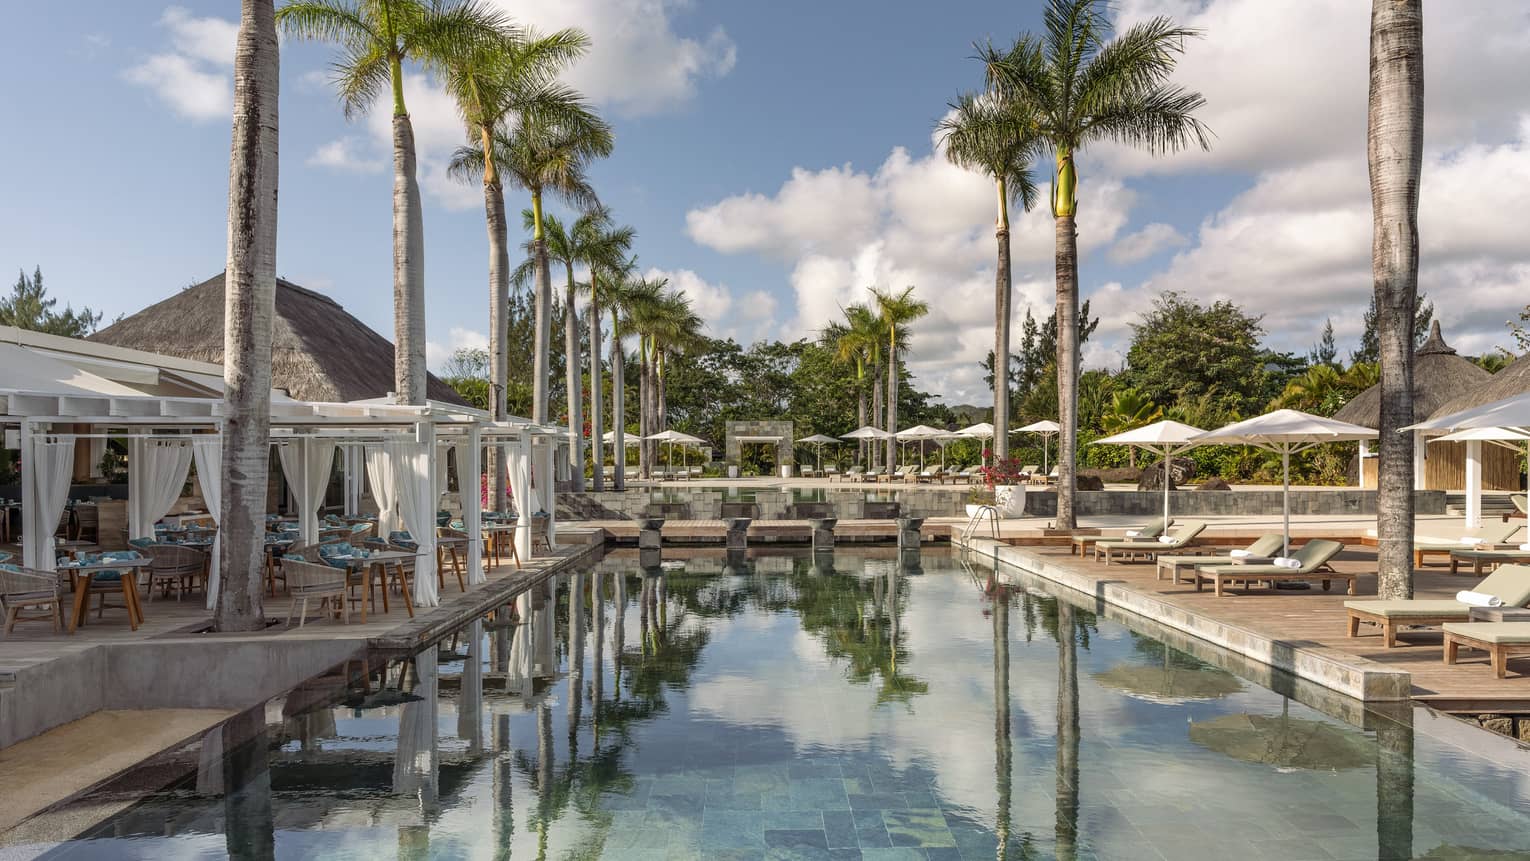 Outdoor pool flanked by palm trees, cabanas and lounge chairs with umbrellas